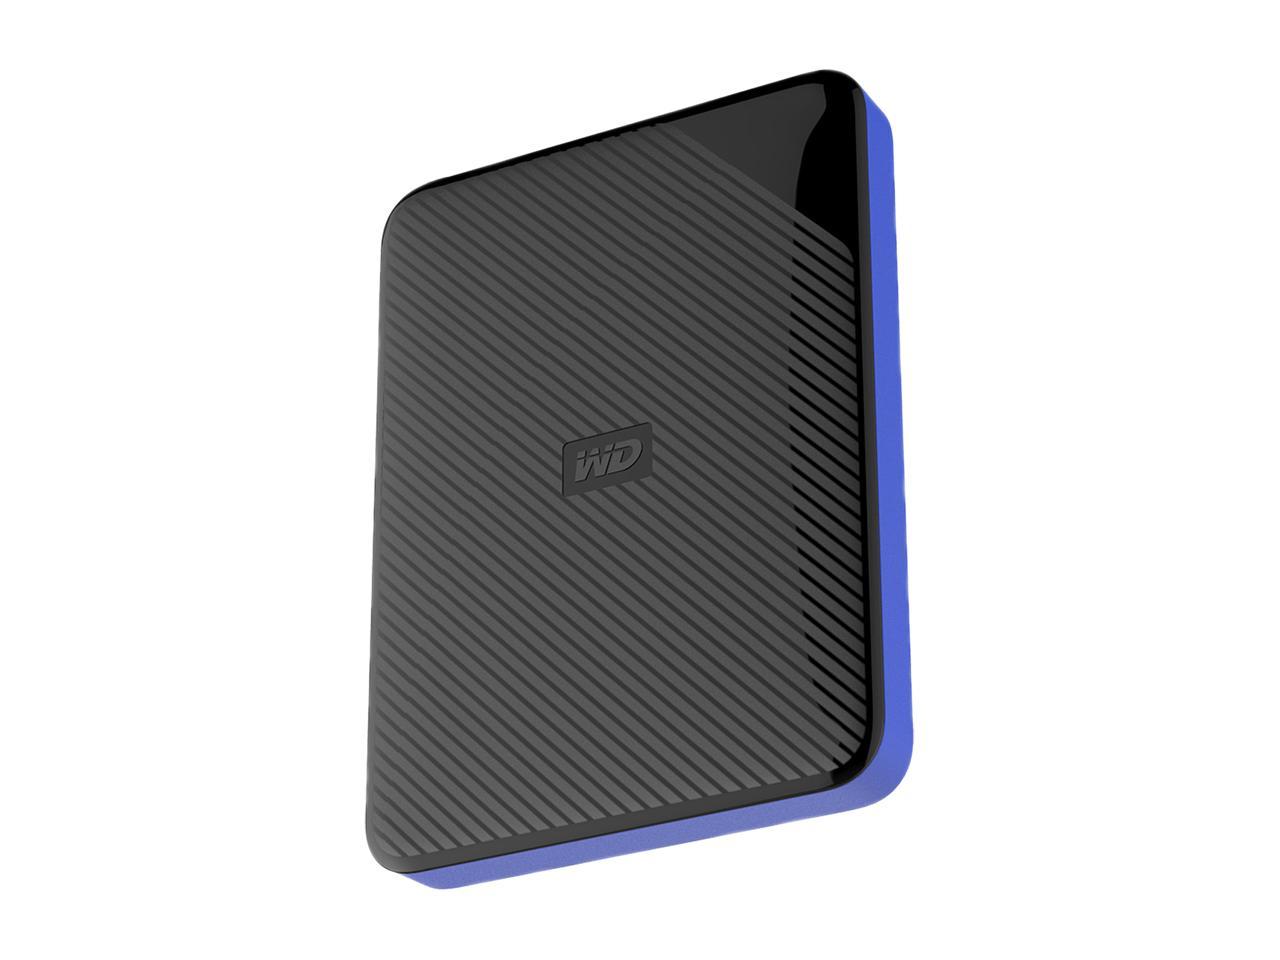 wd 4tb gaming drive works with playstation 4 portable external hard drive